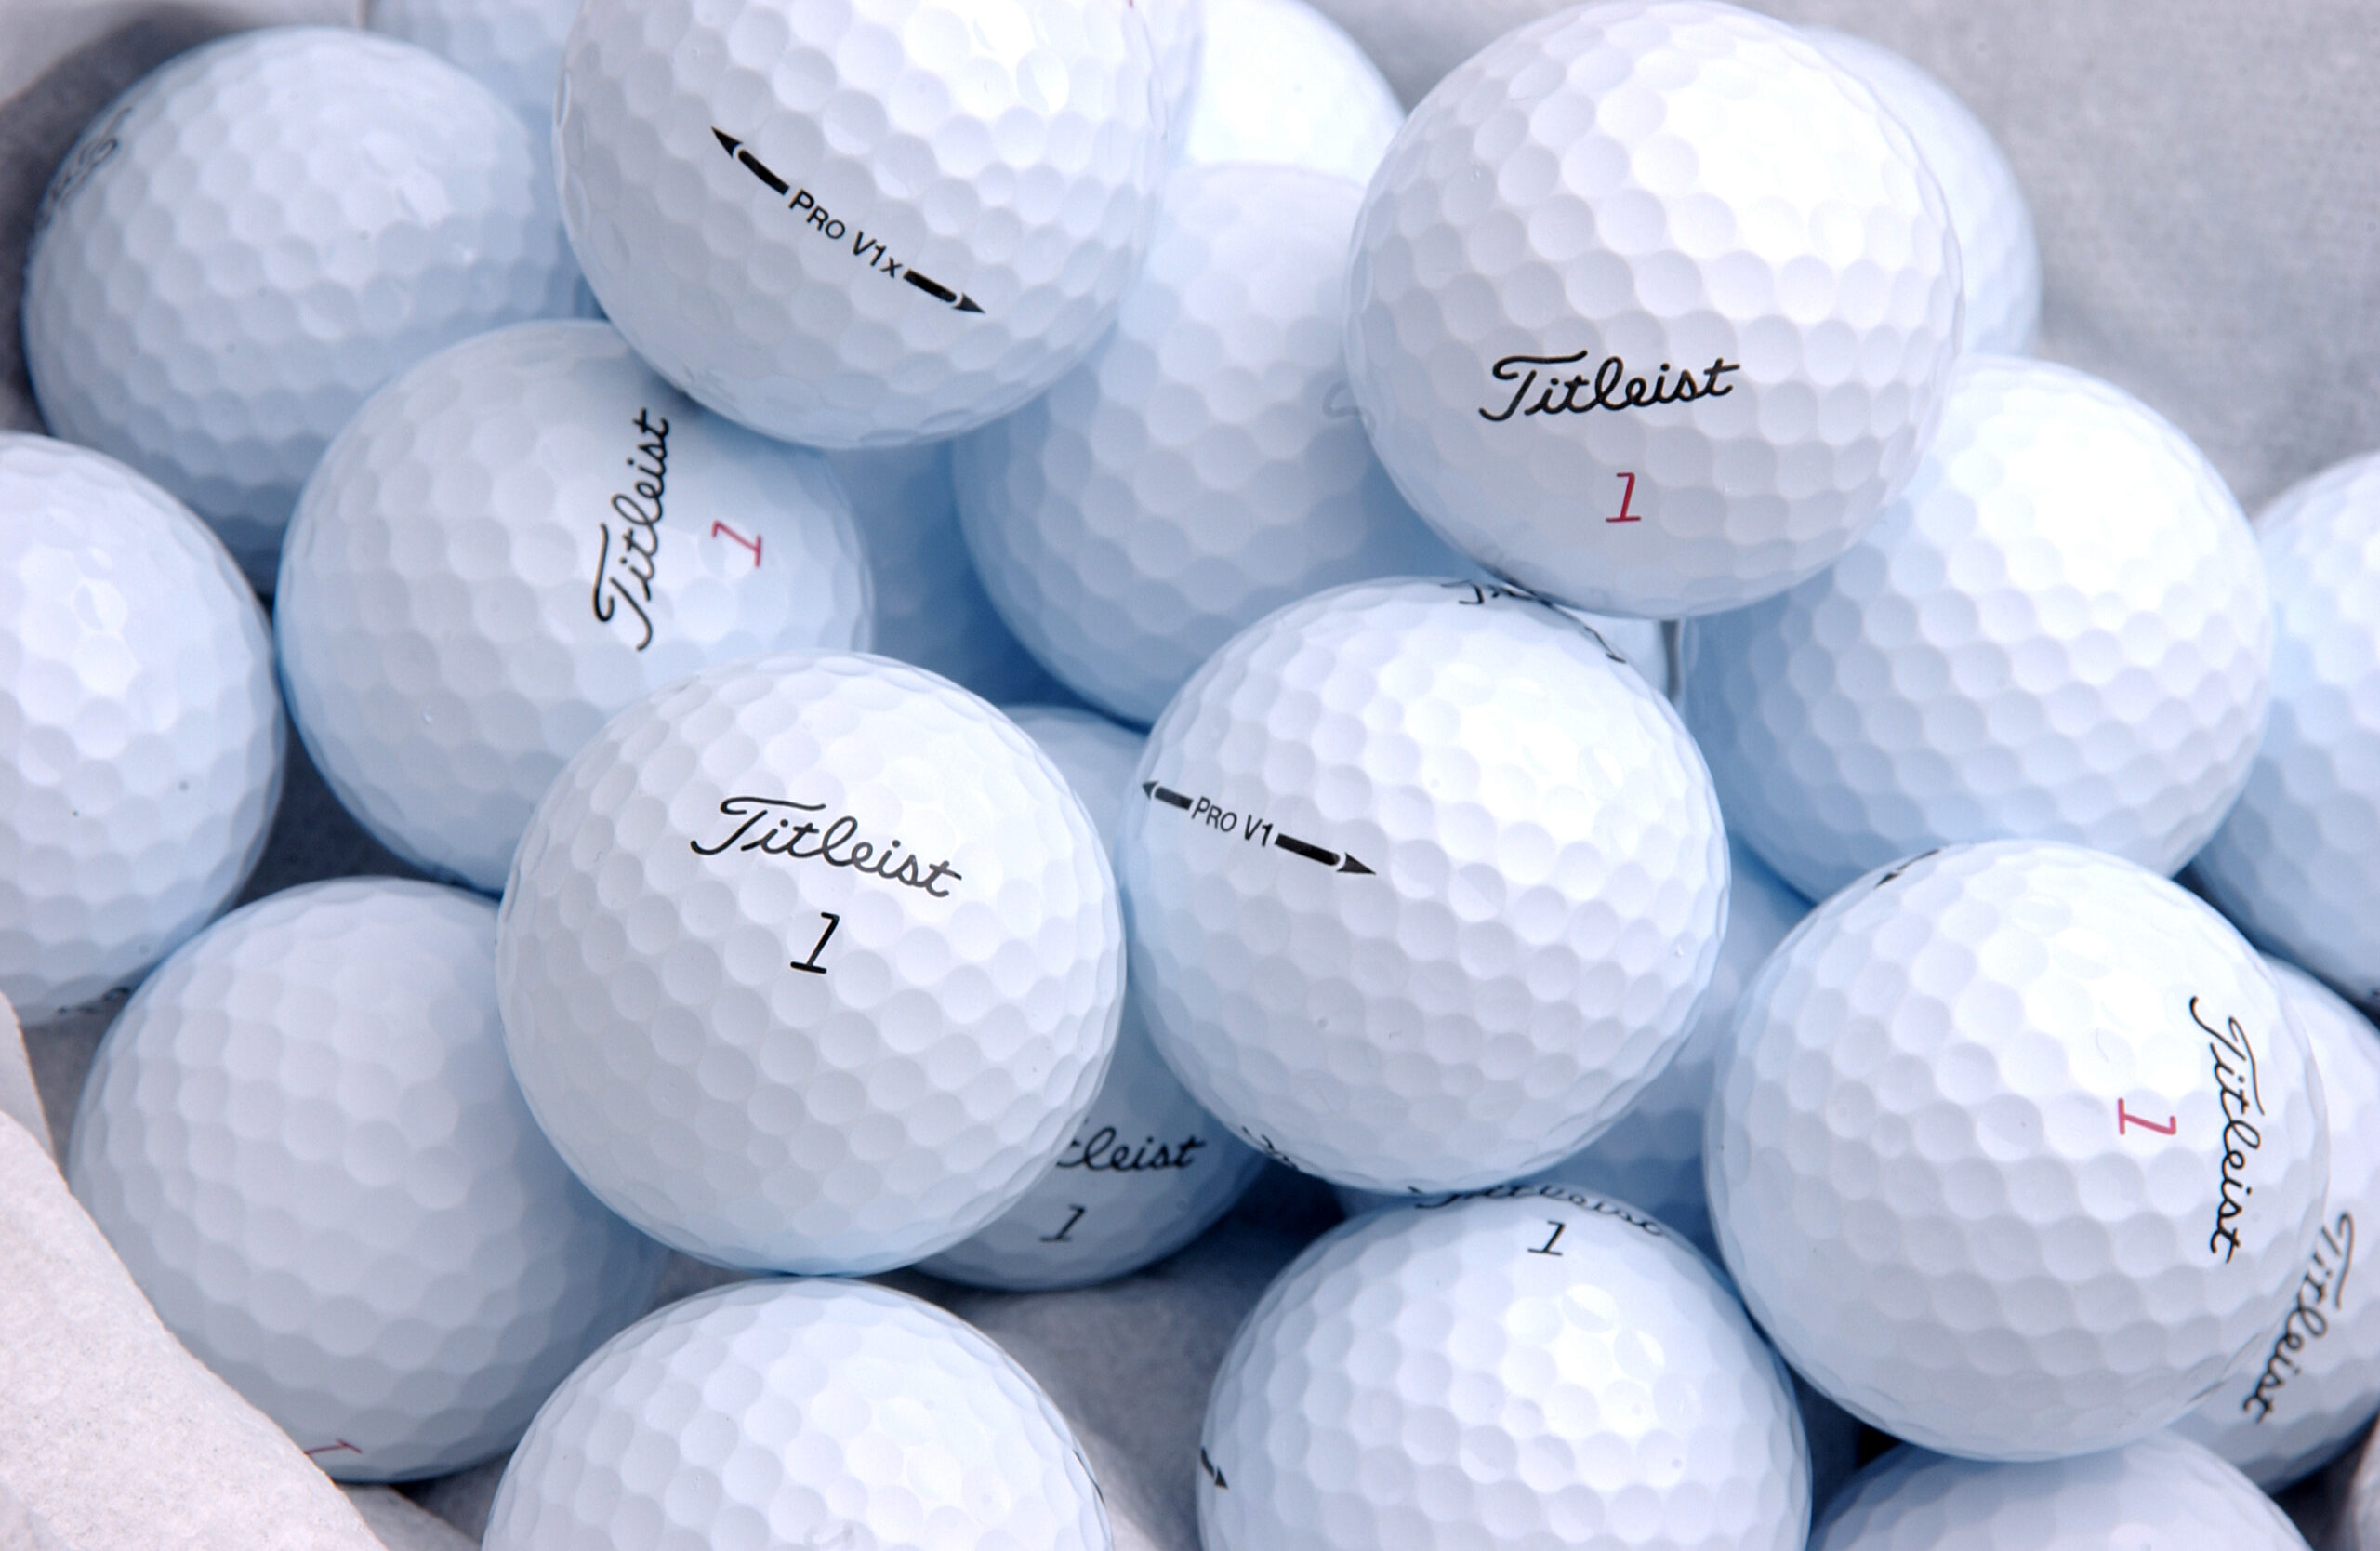 How many dimples on a golf ball? Here all information